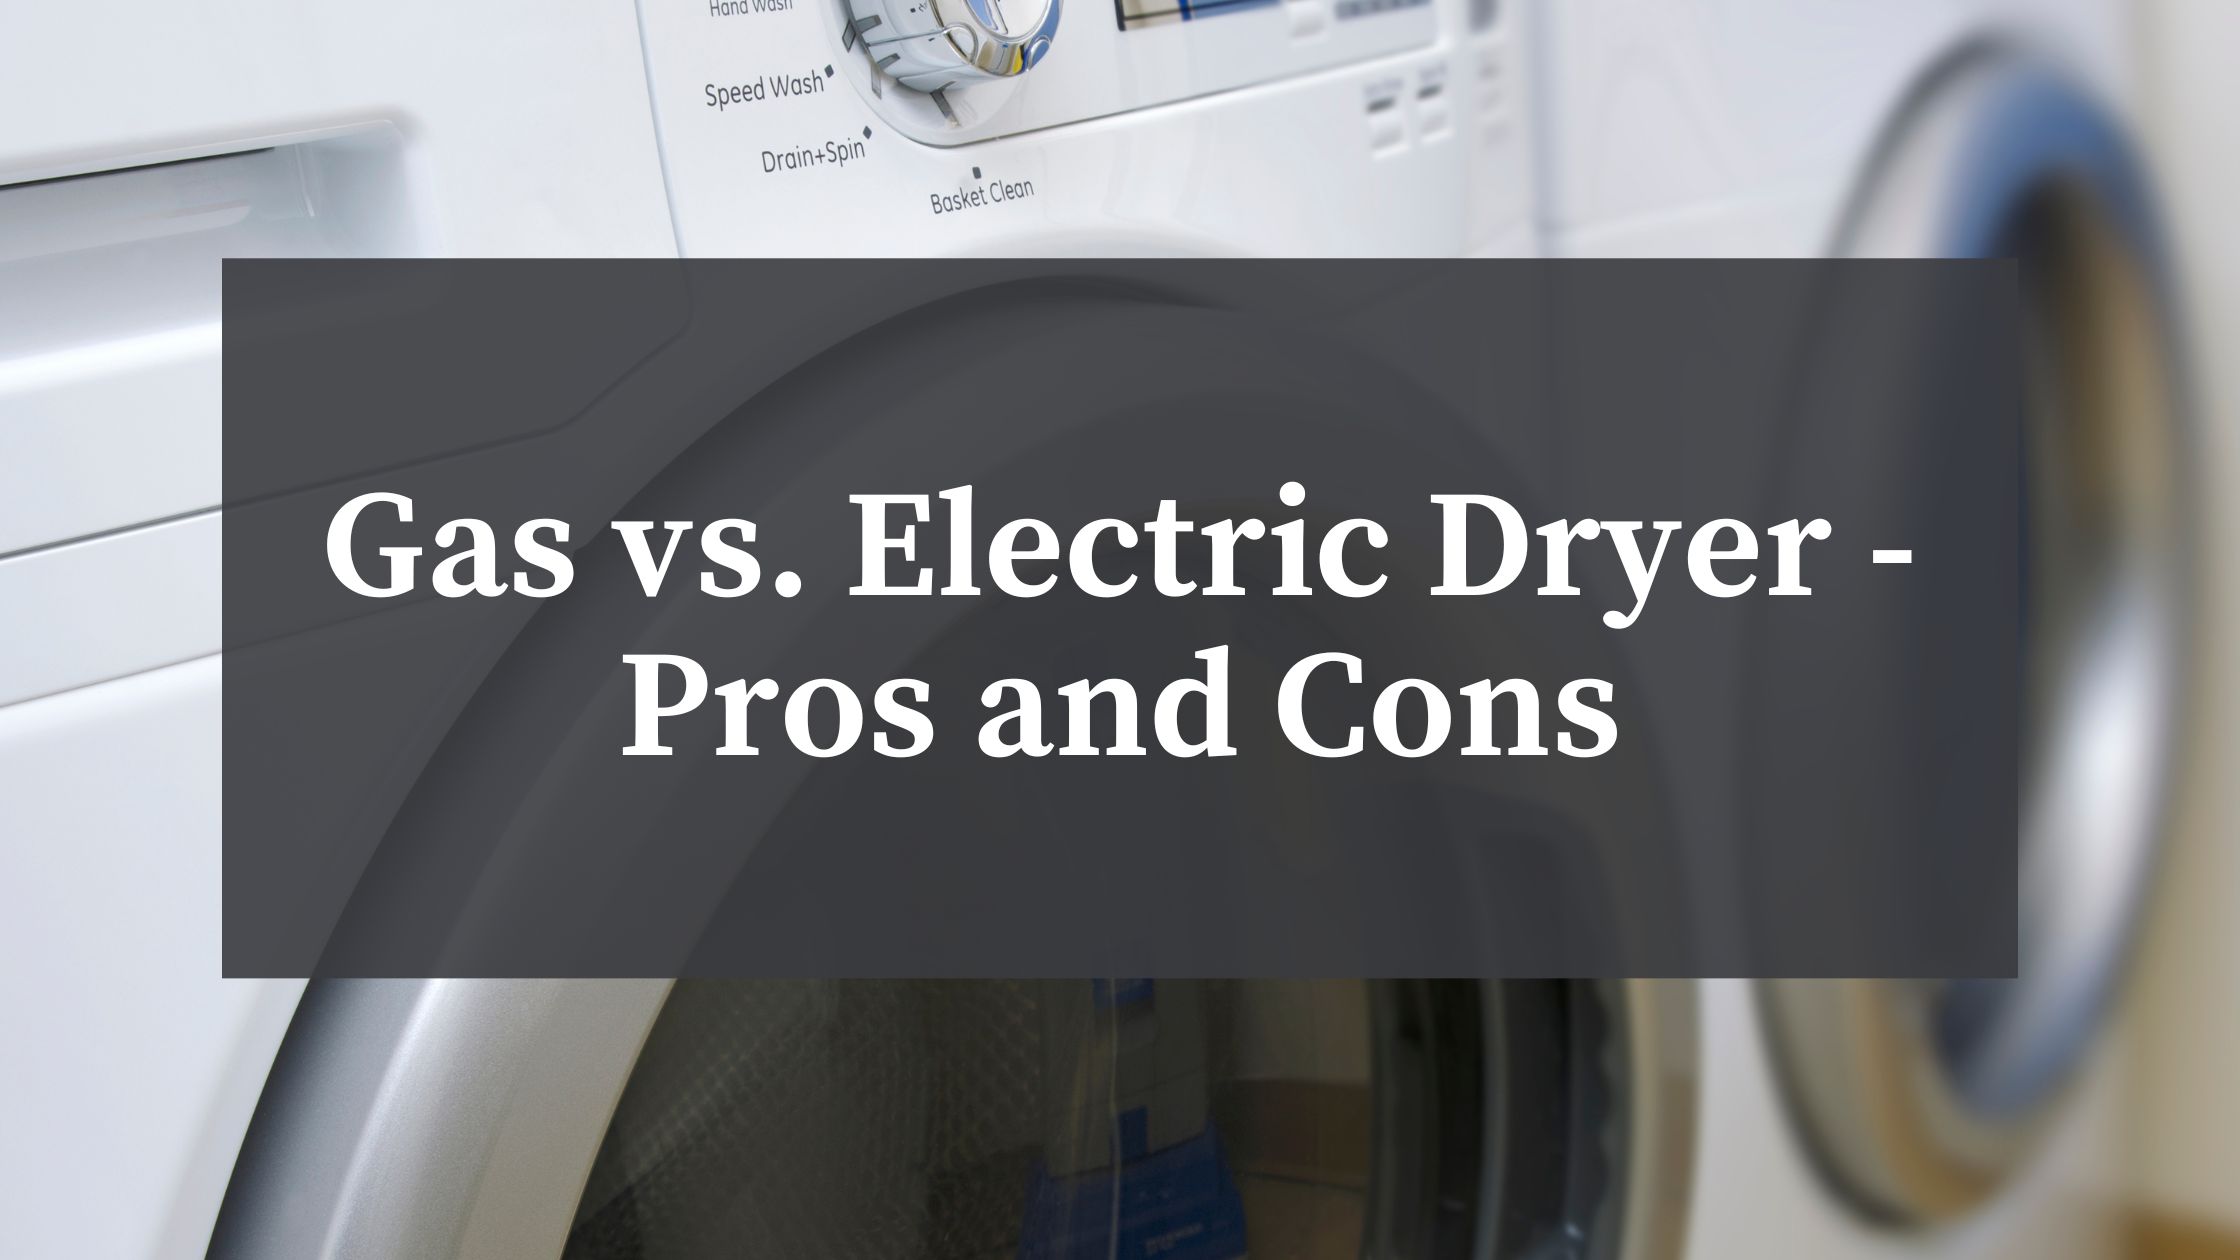 Can You Replace A Gas Dryer With An Electric Dryer